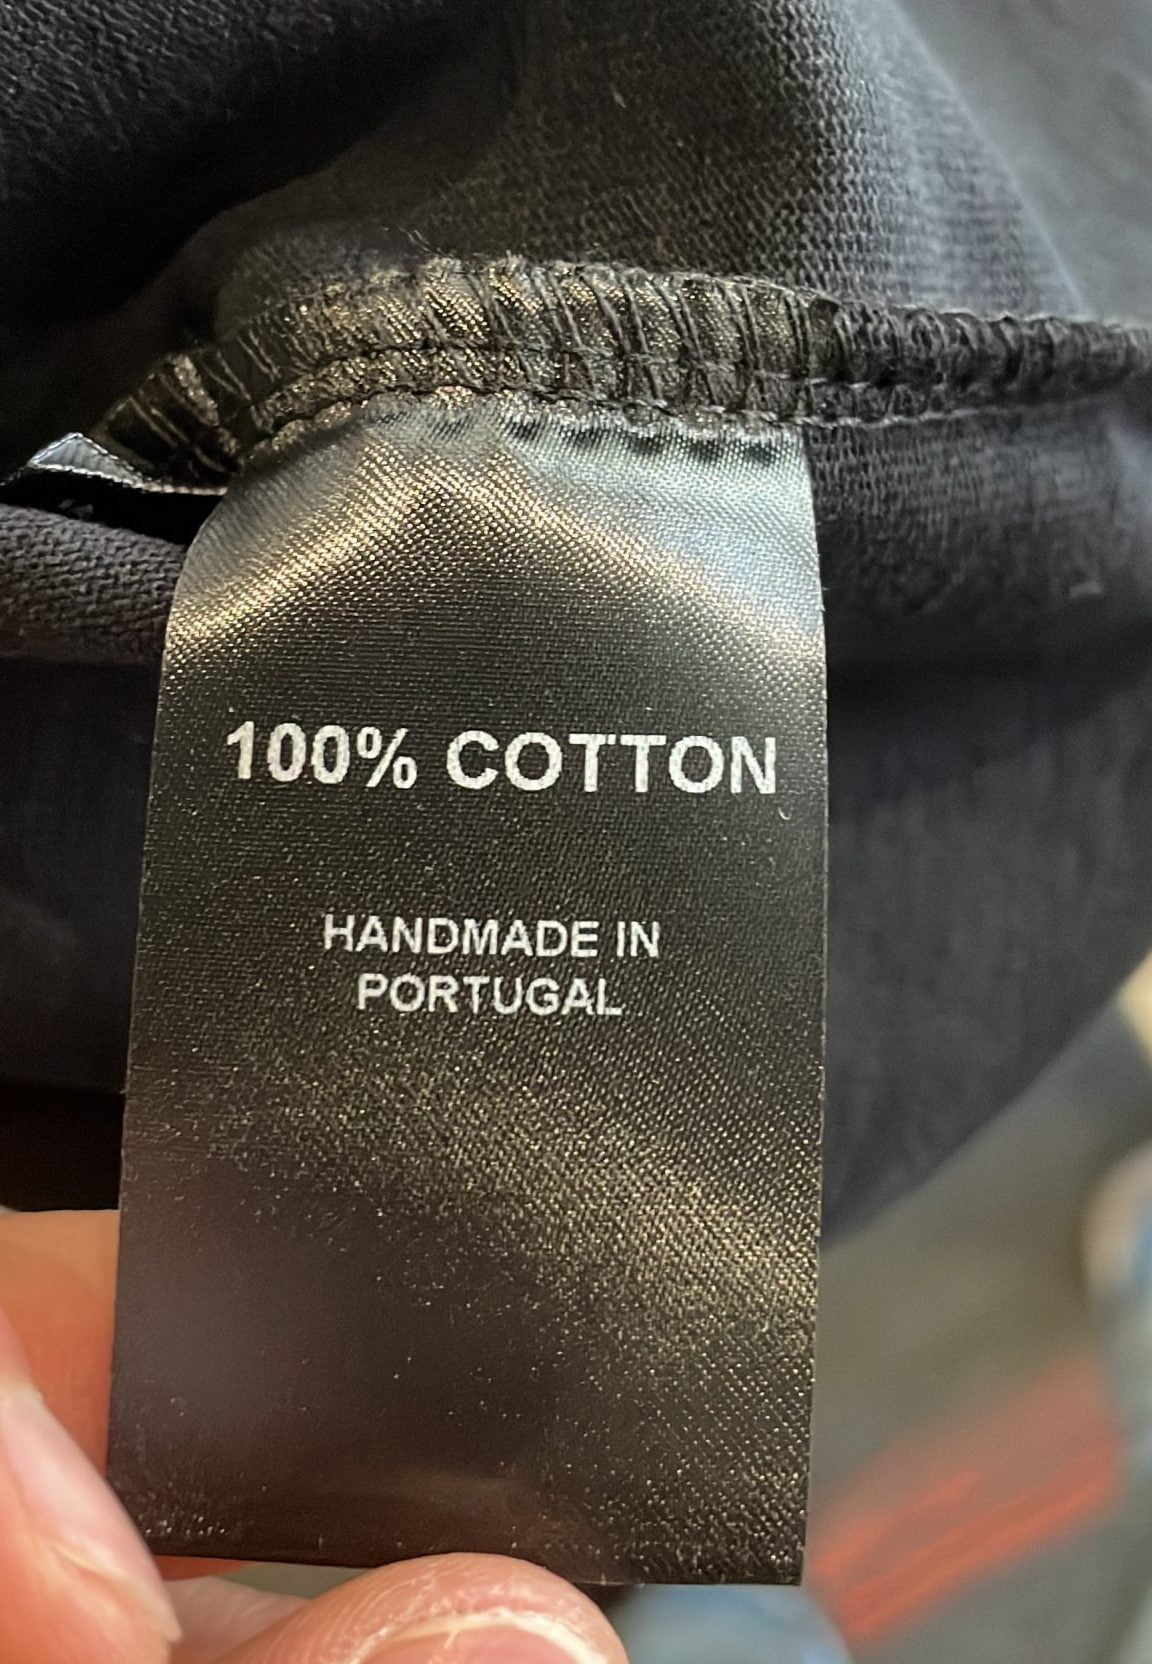 ASBX Production - Produce Clothing in Portugal